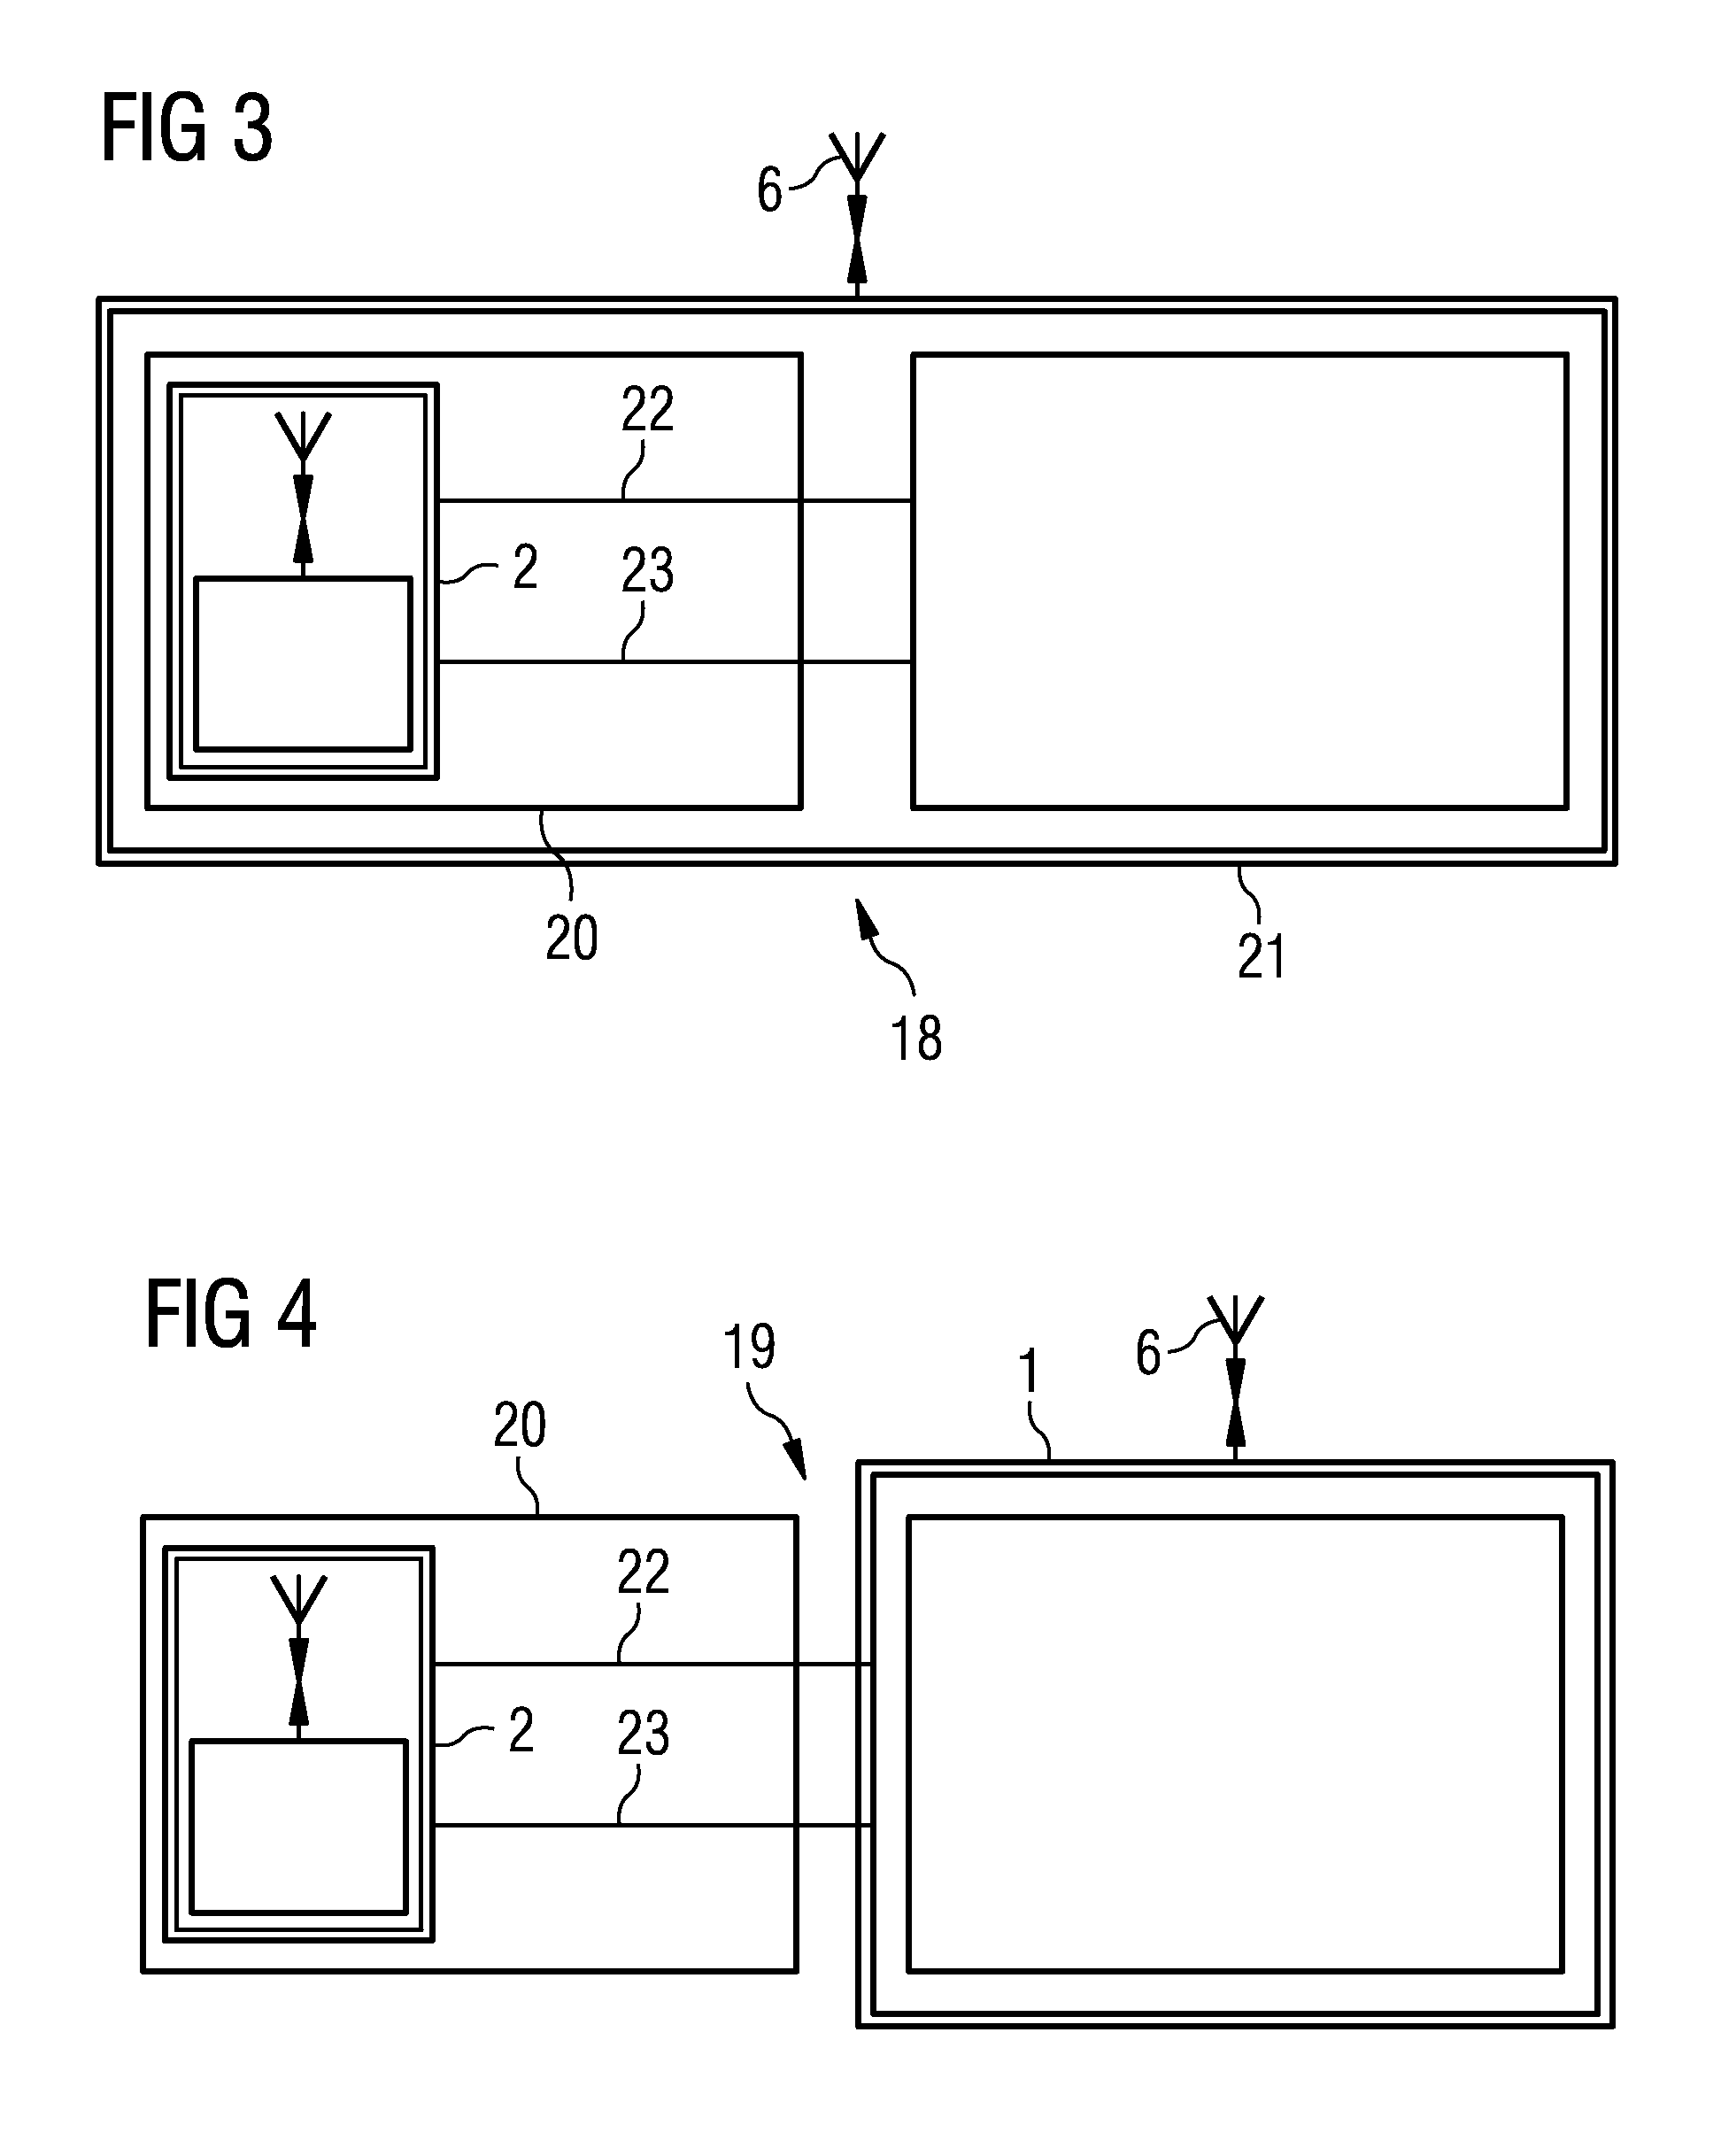 Mobile interface and system for controlling vehicle functions